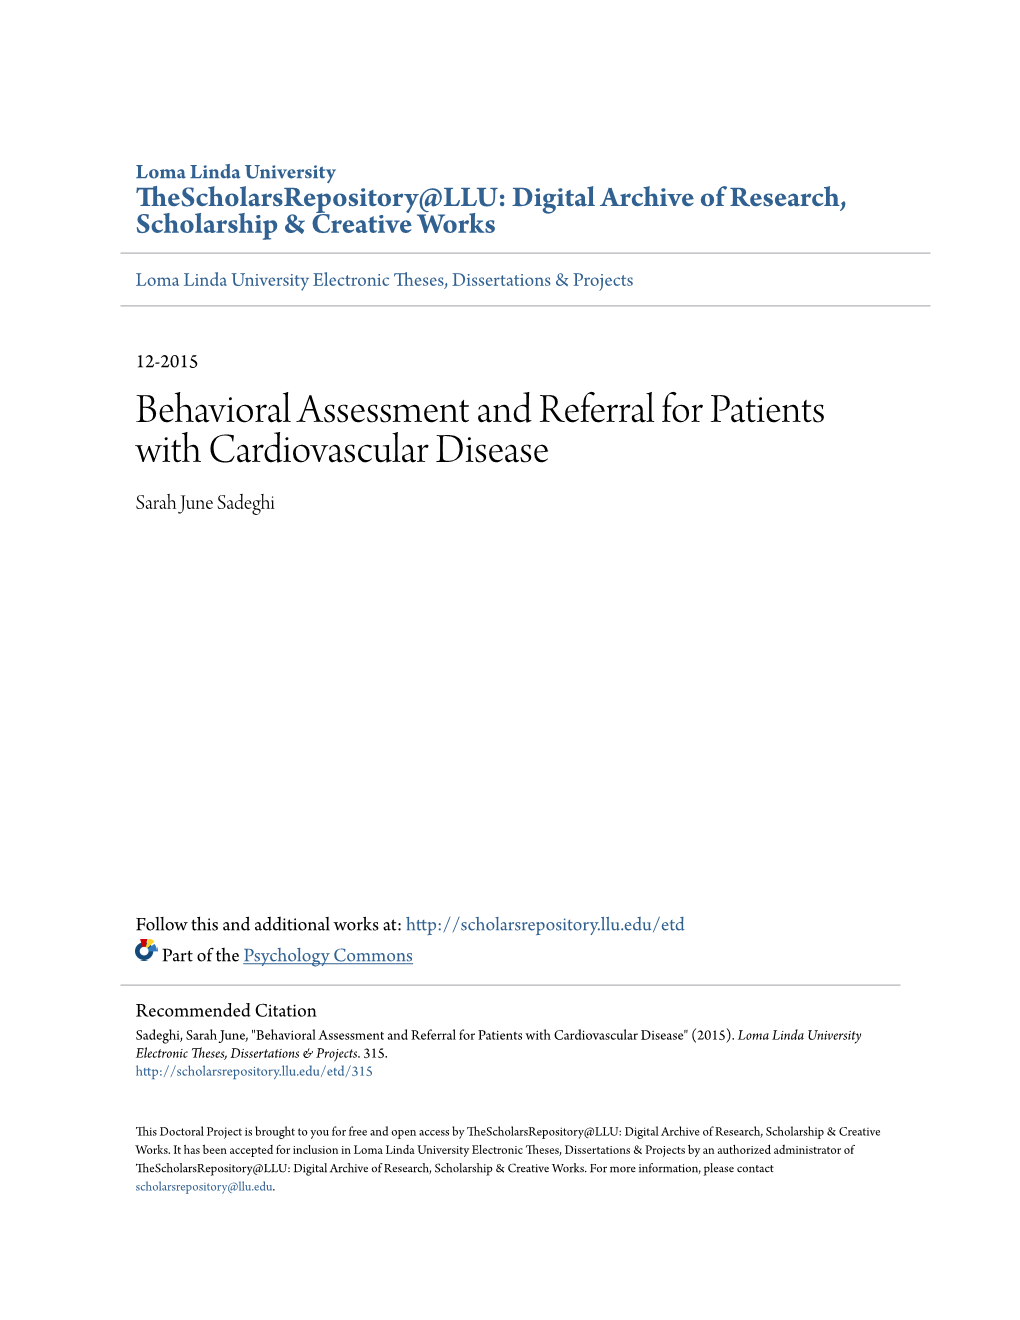 Behavioral Assessment and Referral for Patients with Cardiovascular Disease Sarah June Sadeghi